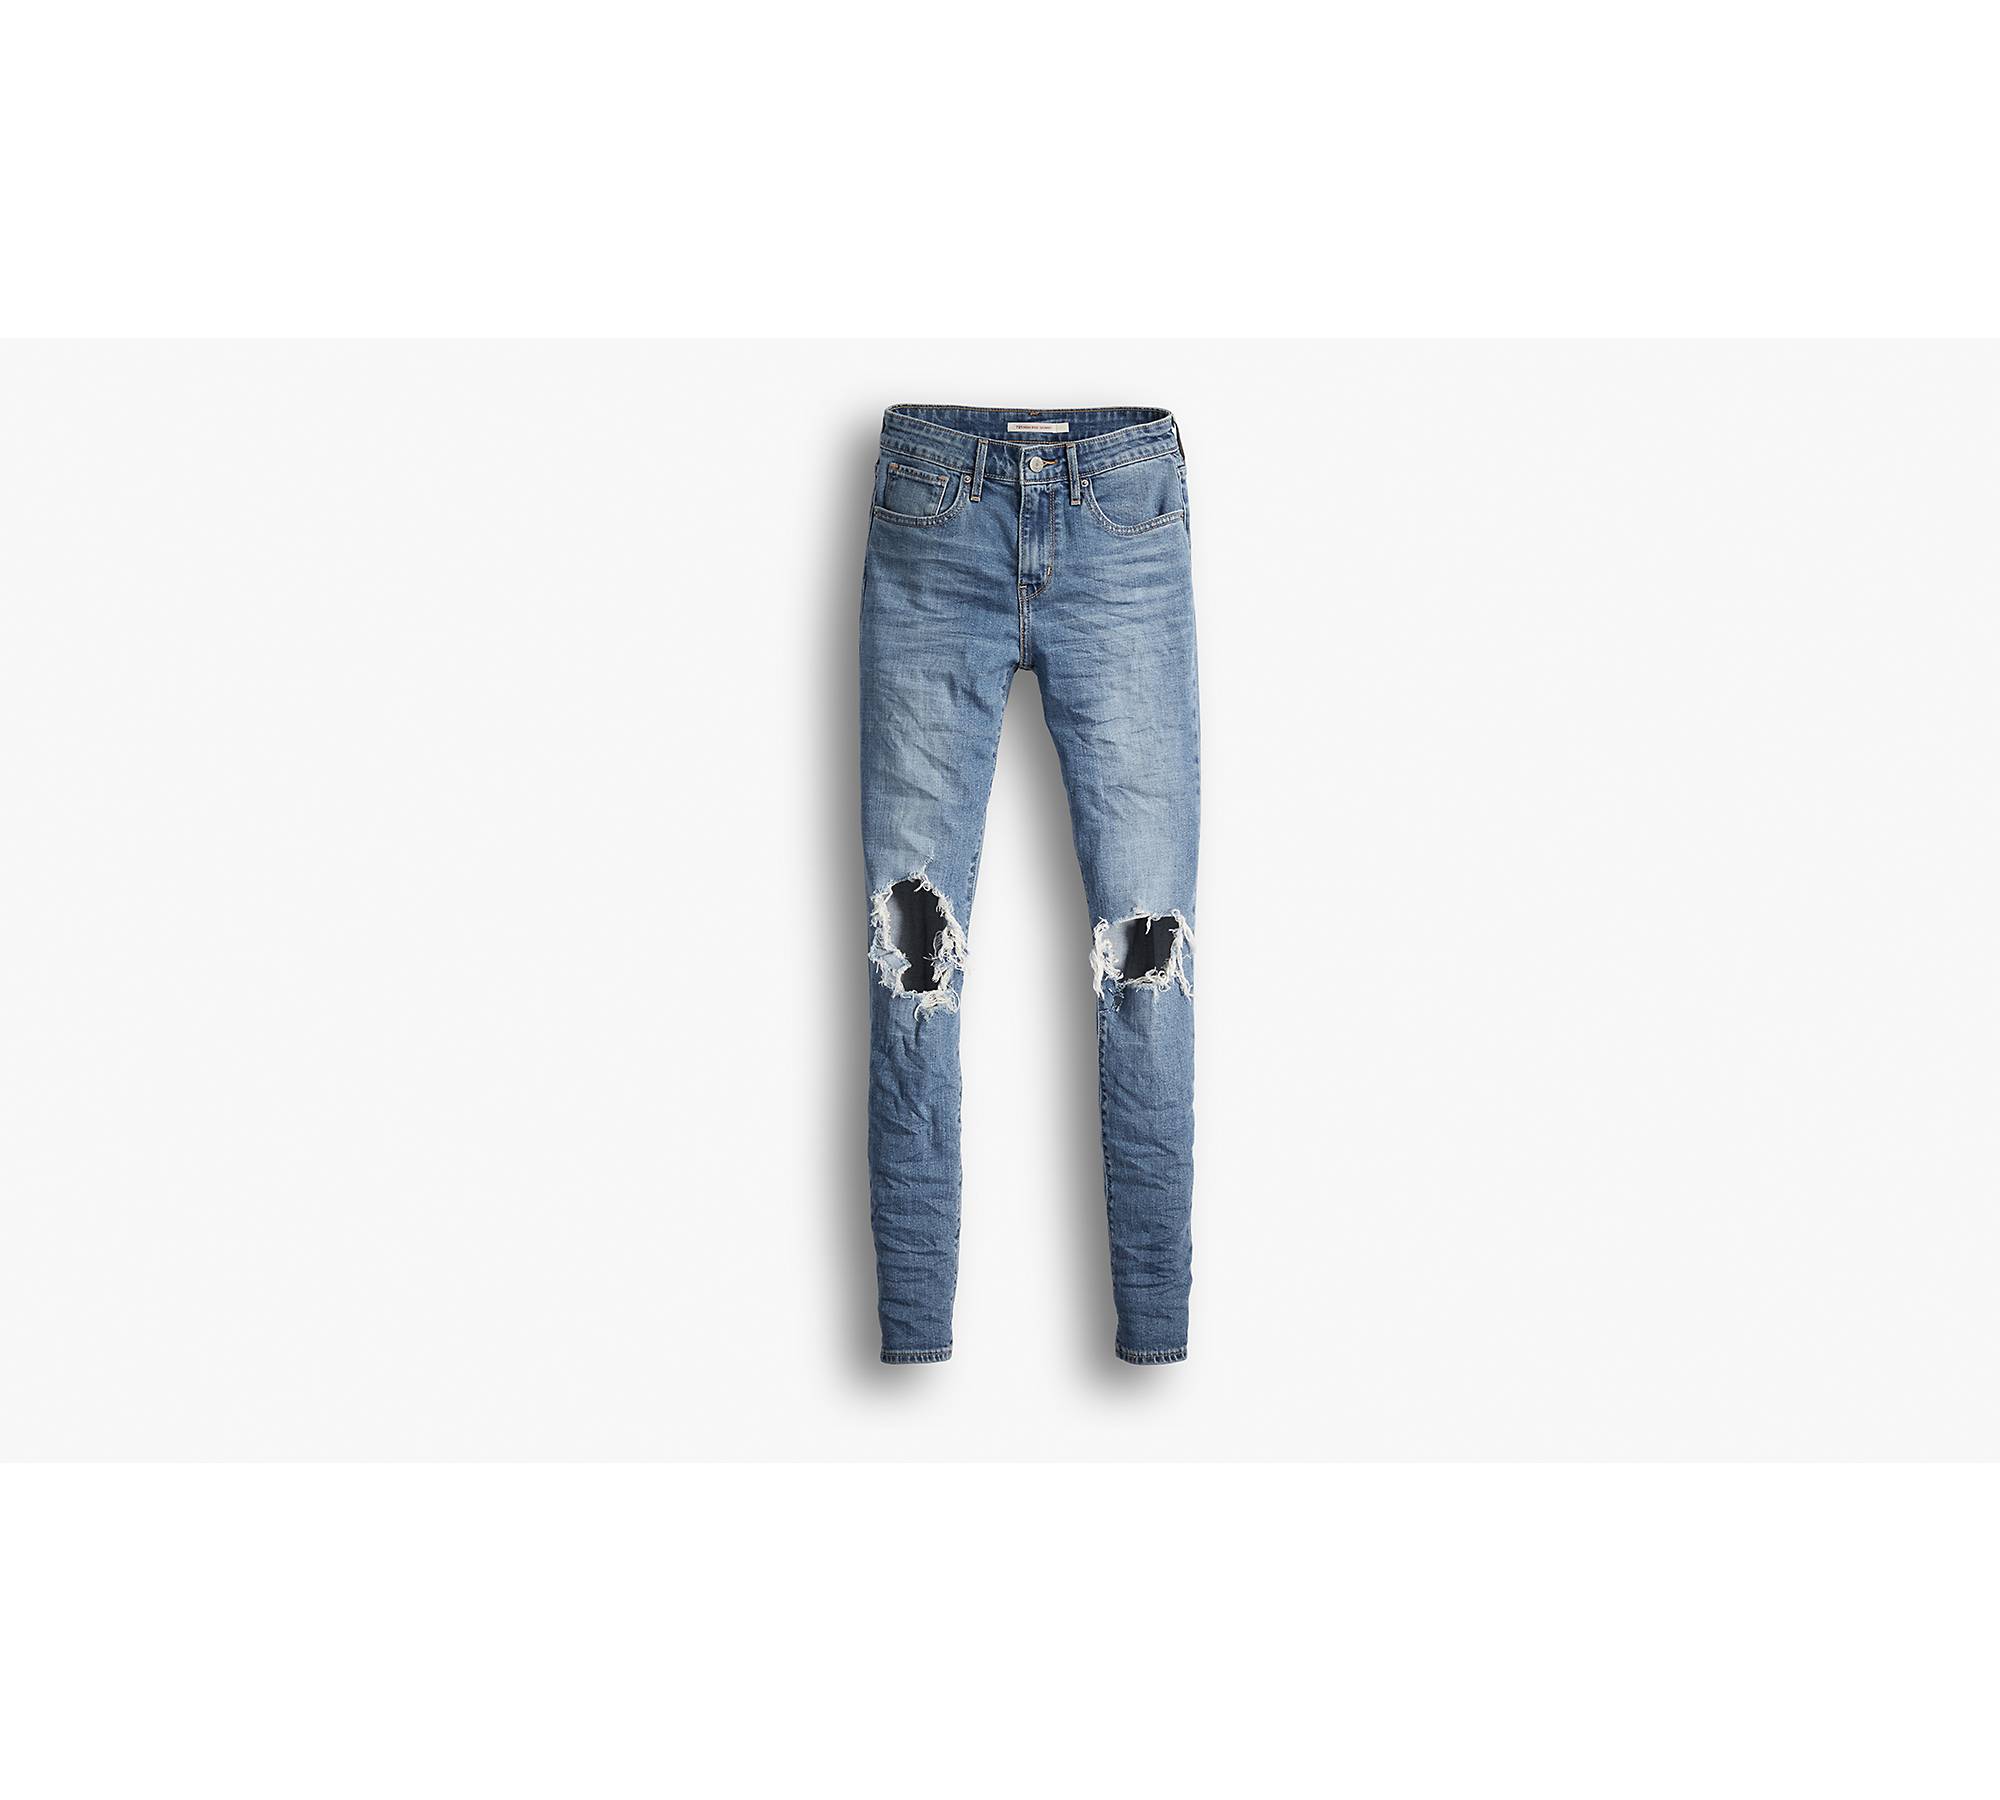  Womens Ripped Jeans For Women High Waisted Jeans